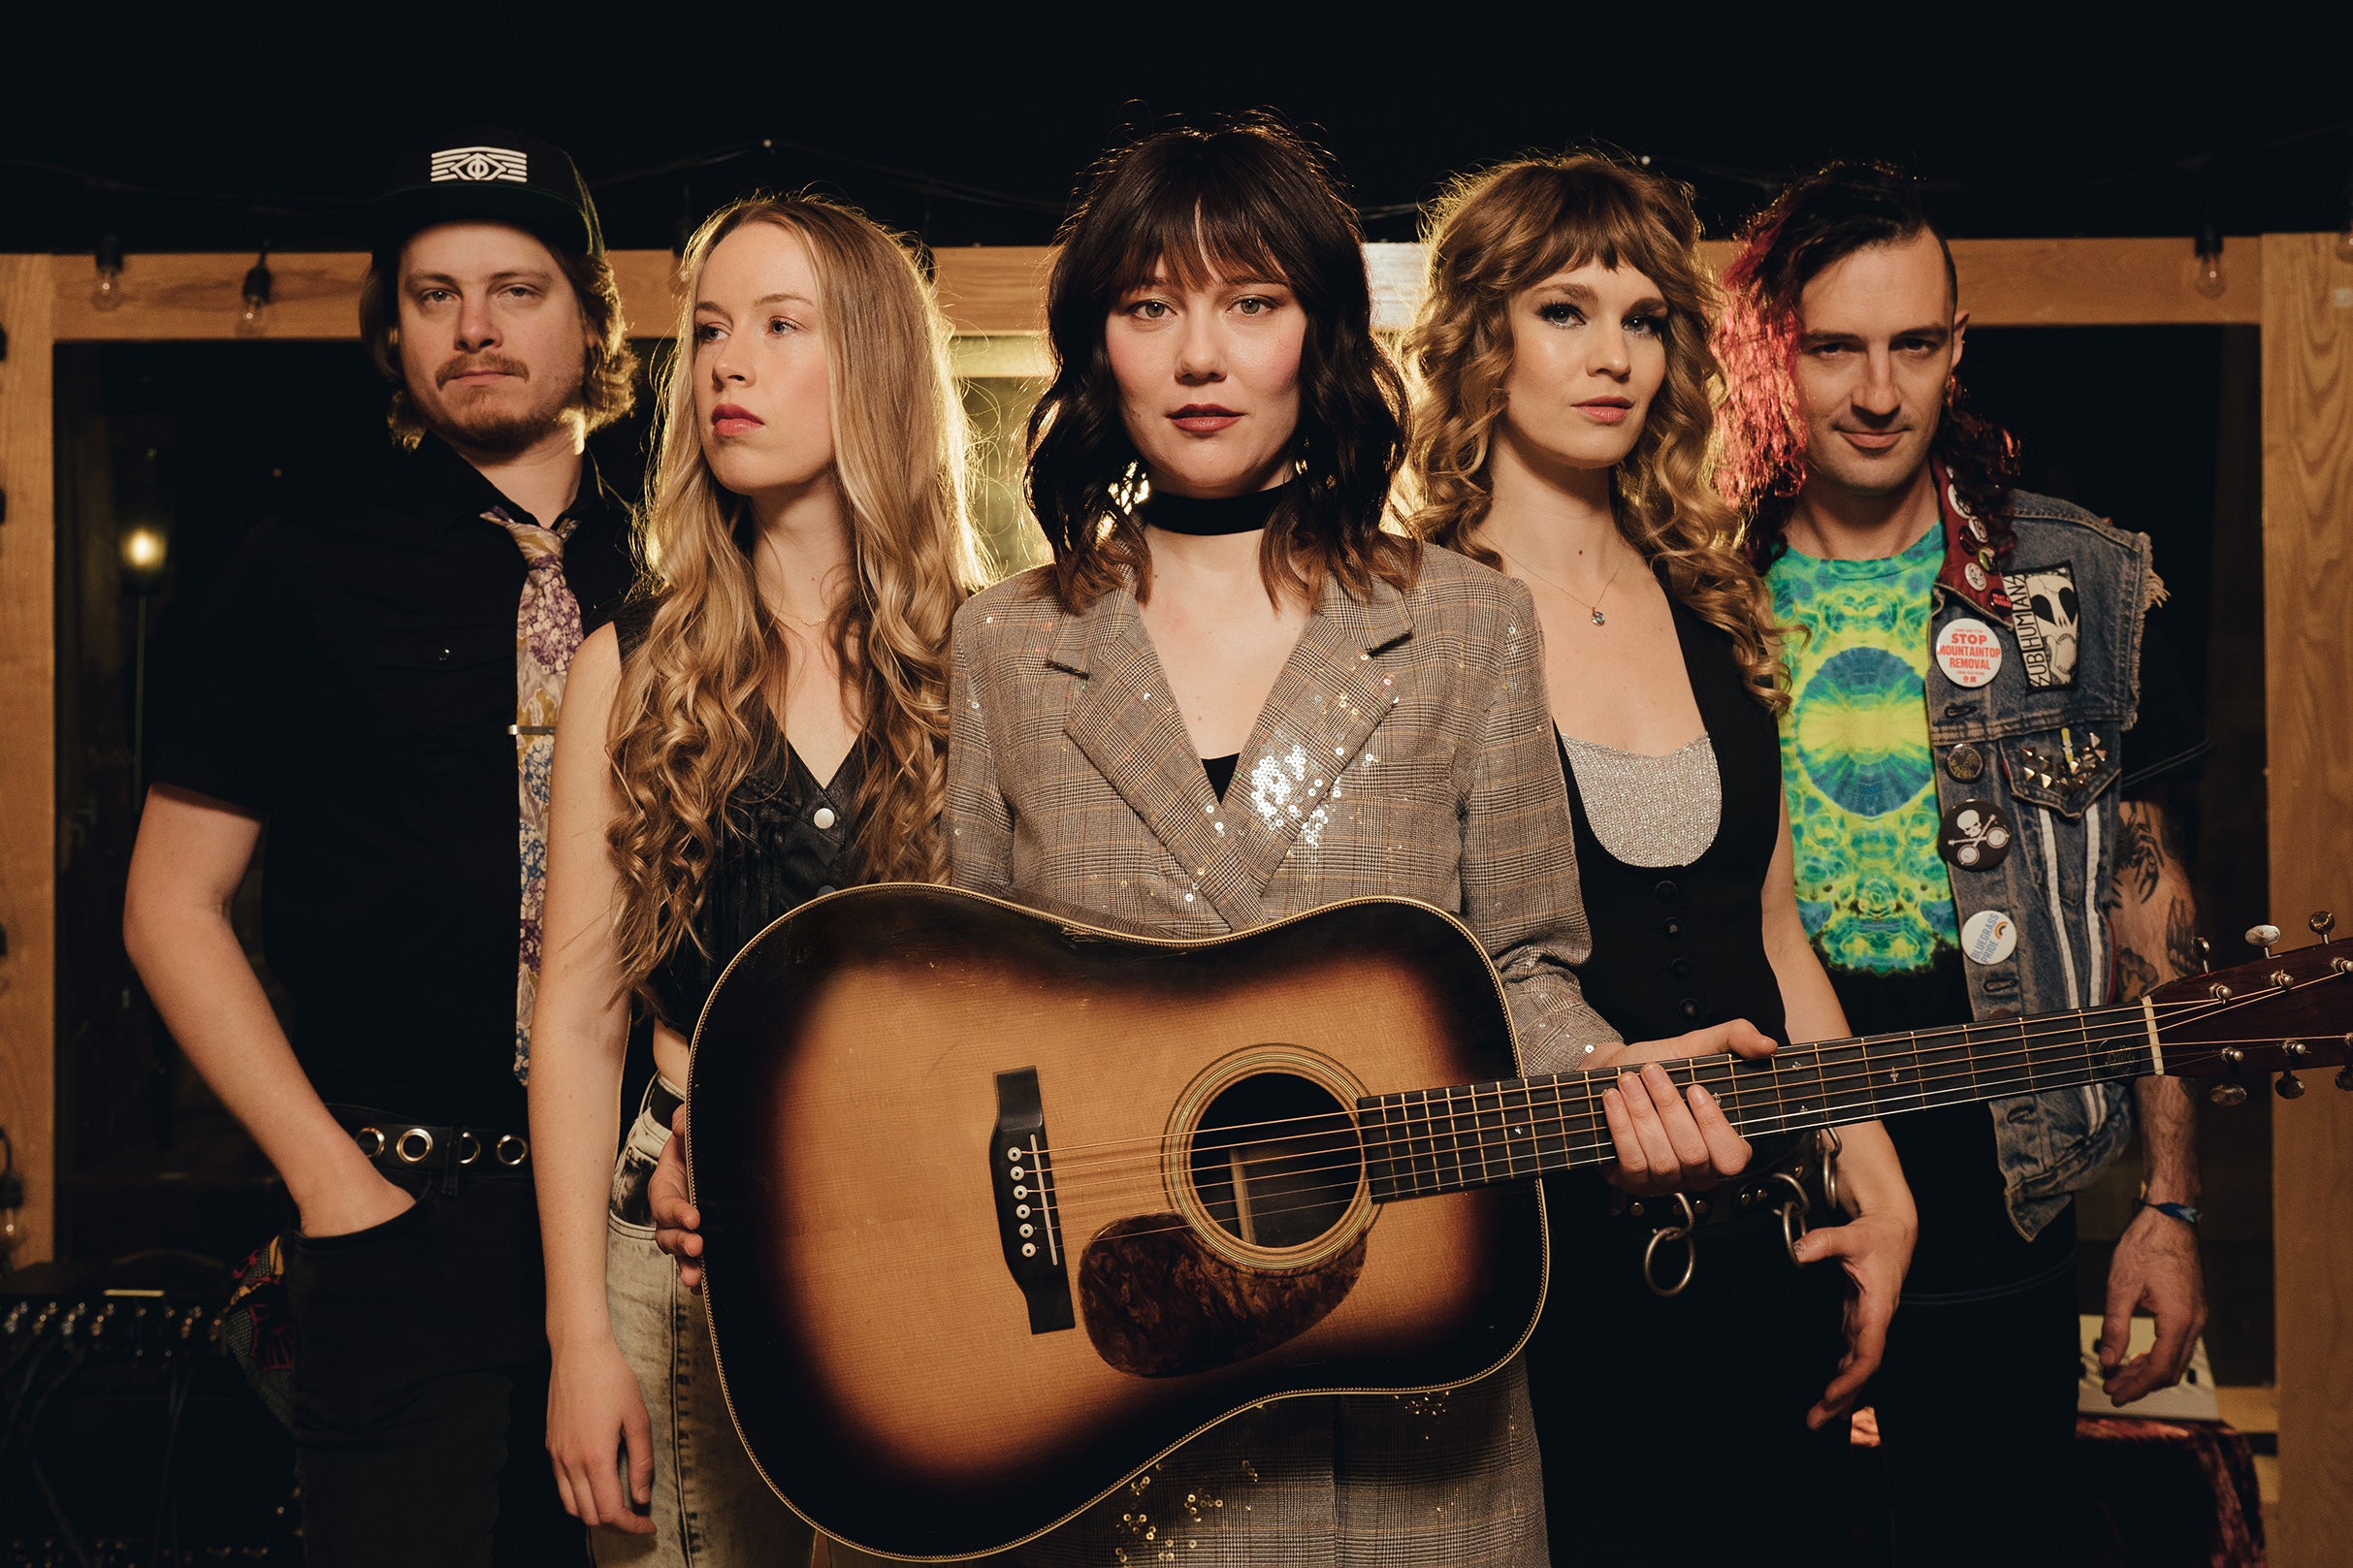 members only presale password for Molly Tuttle & Golden Highway tickets in Houston